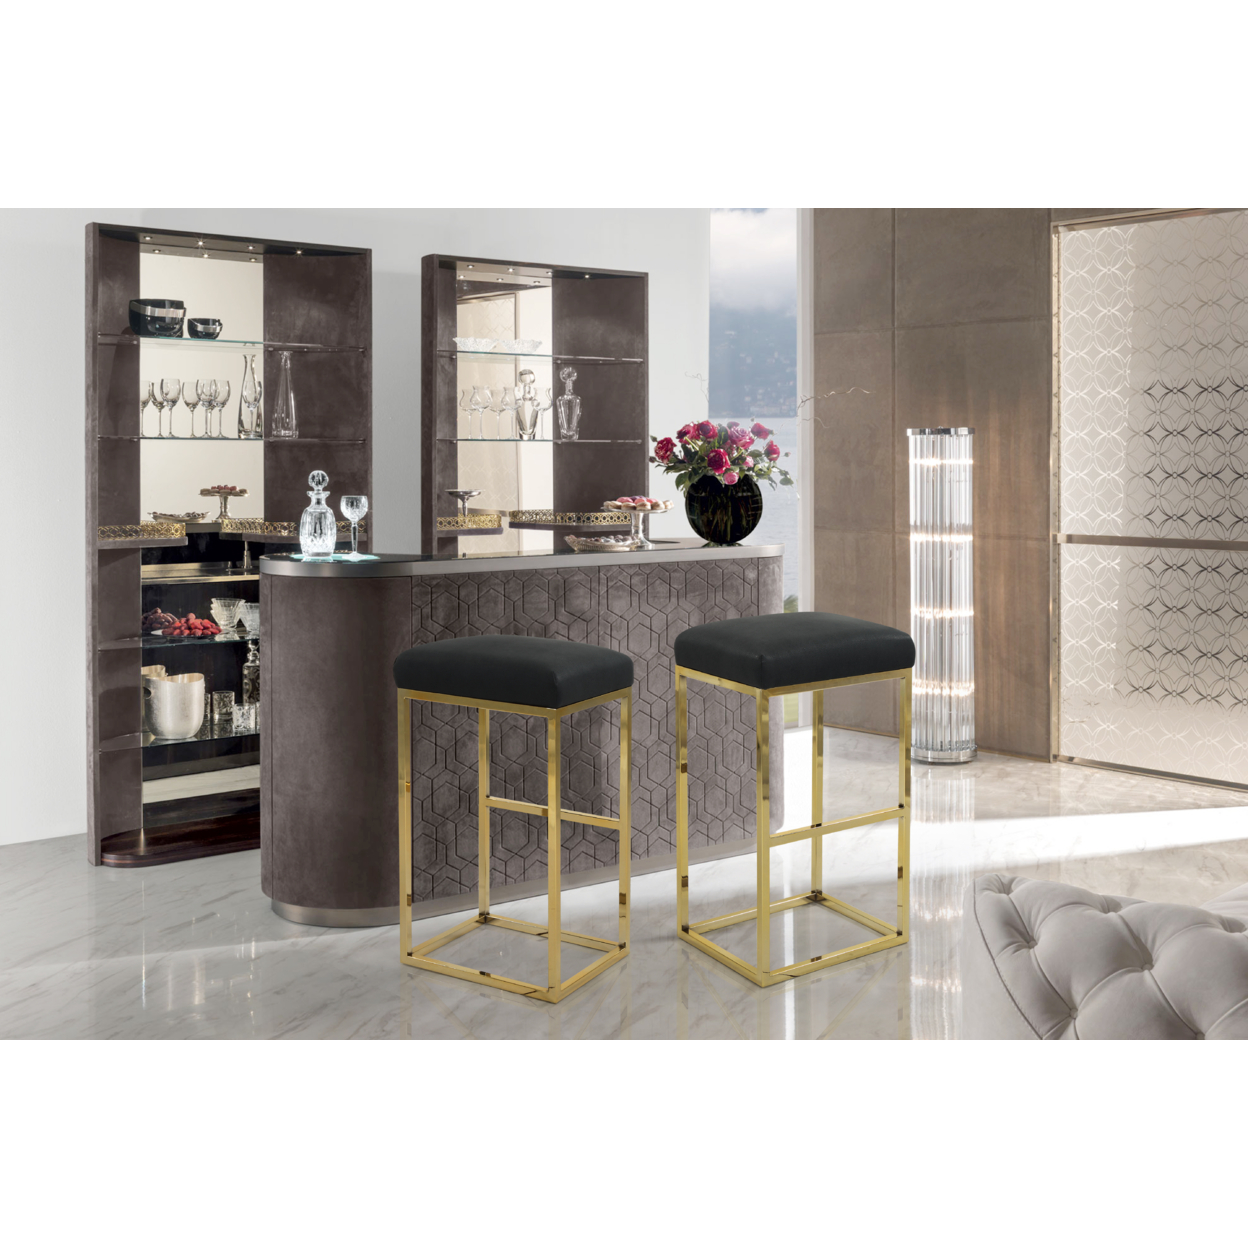 Radford Bar Stool Chair PU Leather Upholstered Seat Backless Design Architectural Goldtone Solid Metal Base - Grey